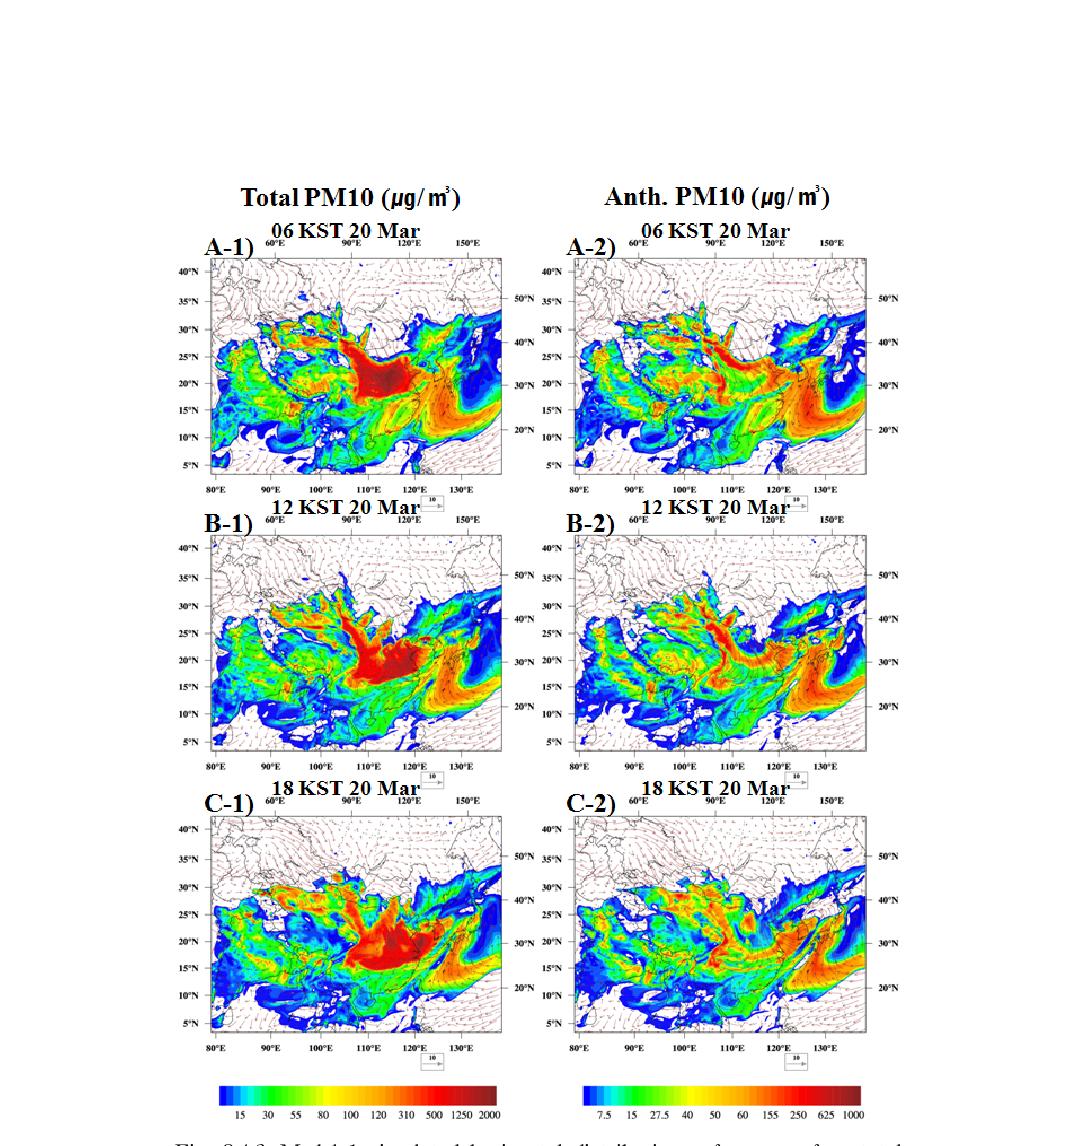 Model 1 simulated horizontal distributions of near surface total PM10 concentration (left panel, µg m-3) and anthropogenic PM10 concentration (right panel; μg m-3) at (a) 0600 KST 20, (b) 1200 KST 20, (c) 18 KST 20, (d) 00 KST 21, (e) 06 KST 21, (f) 12 KST 21 March 2010.